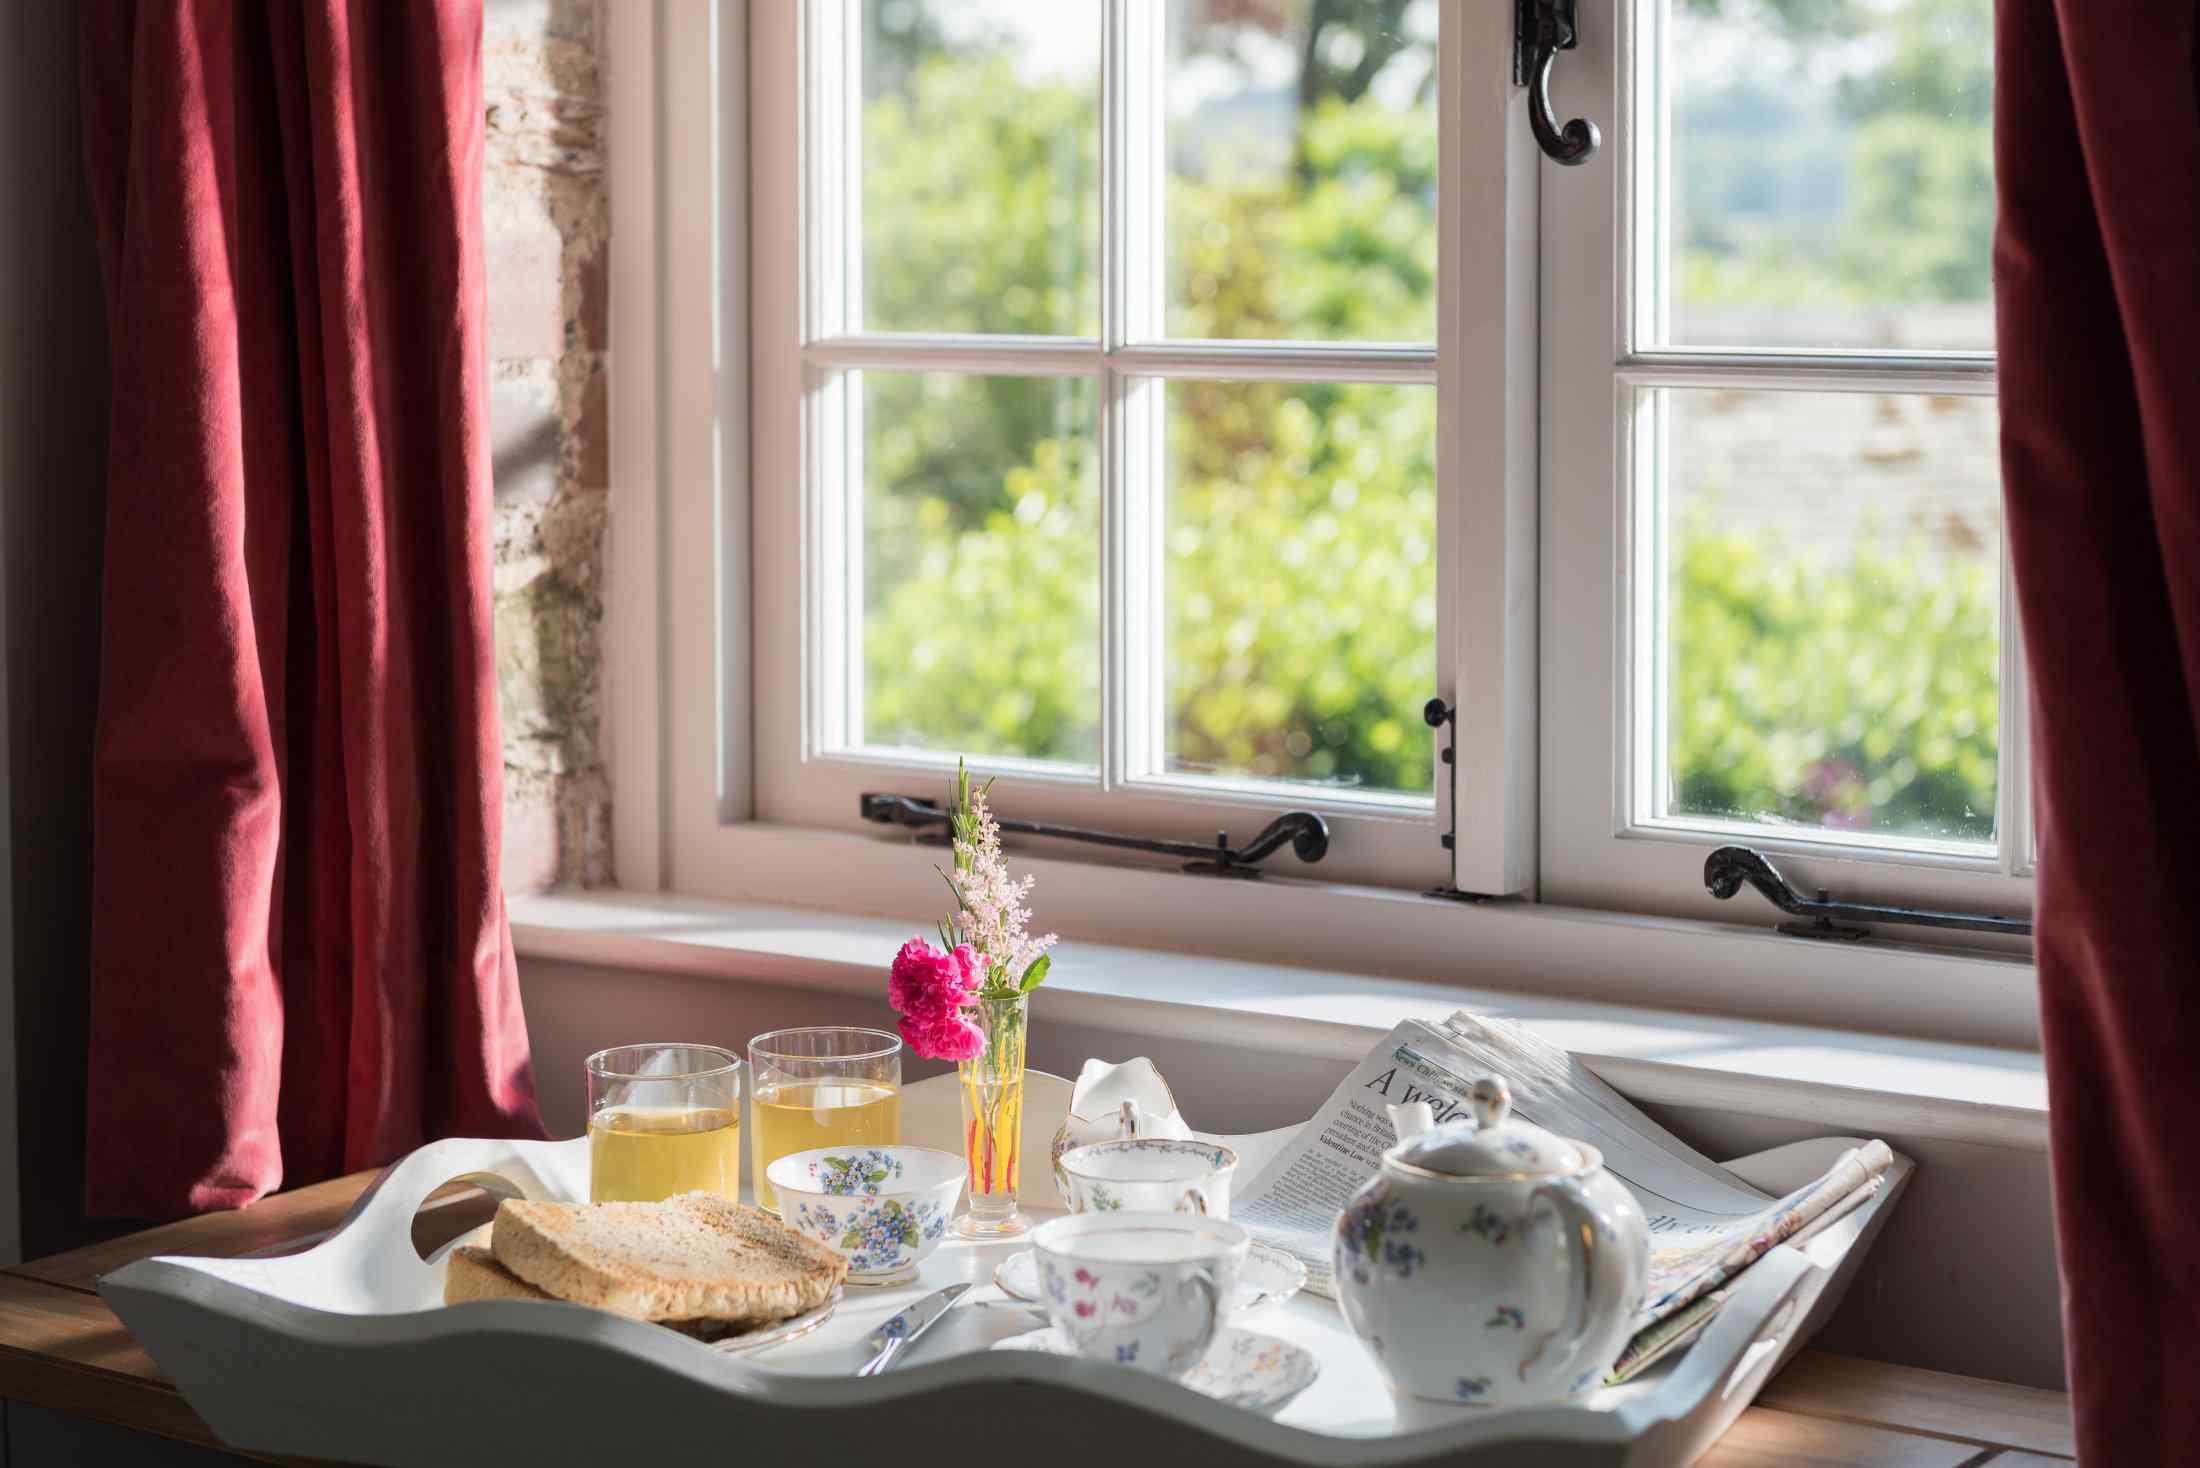 Breakfast in bed with a view